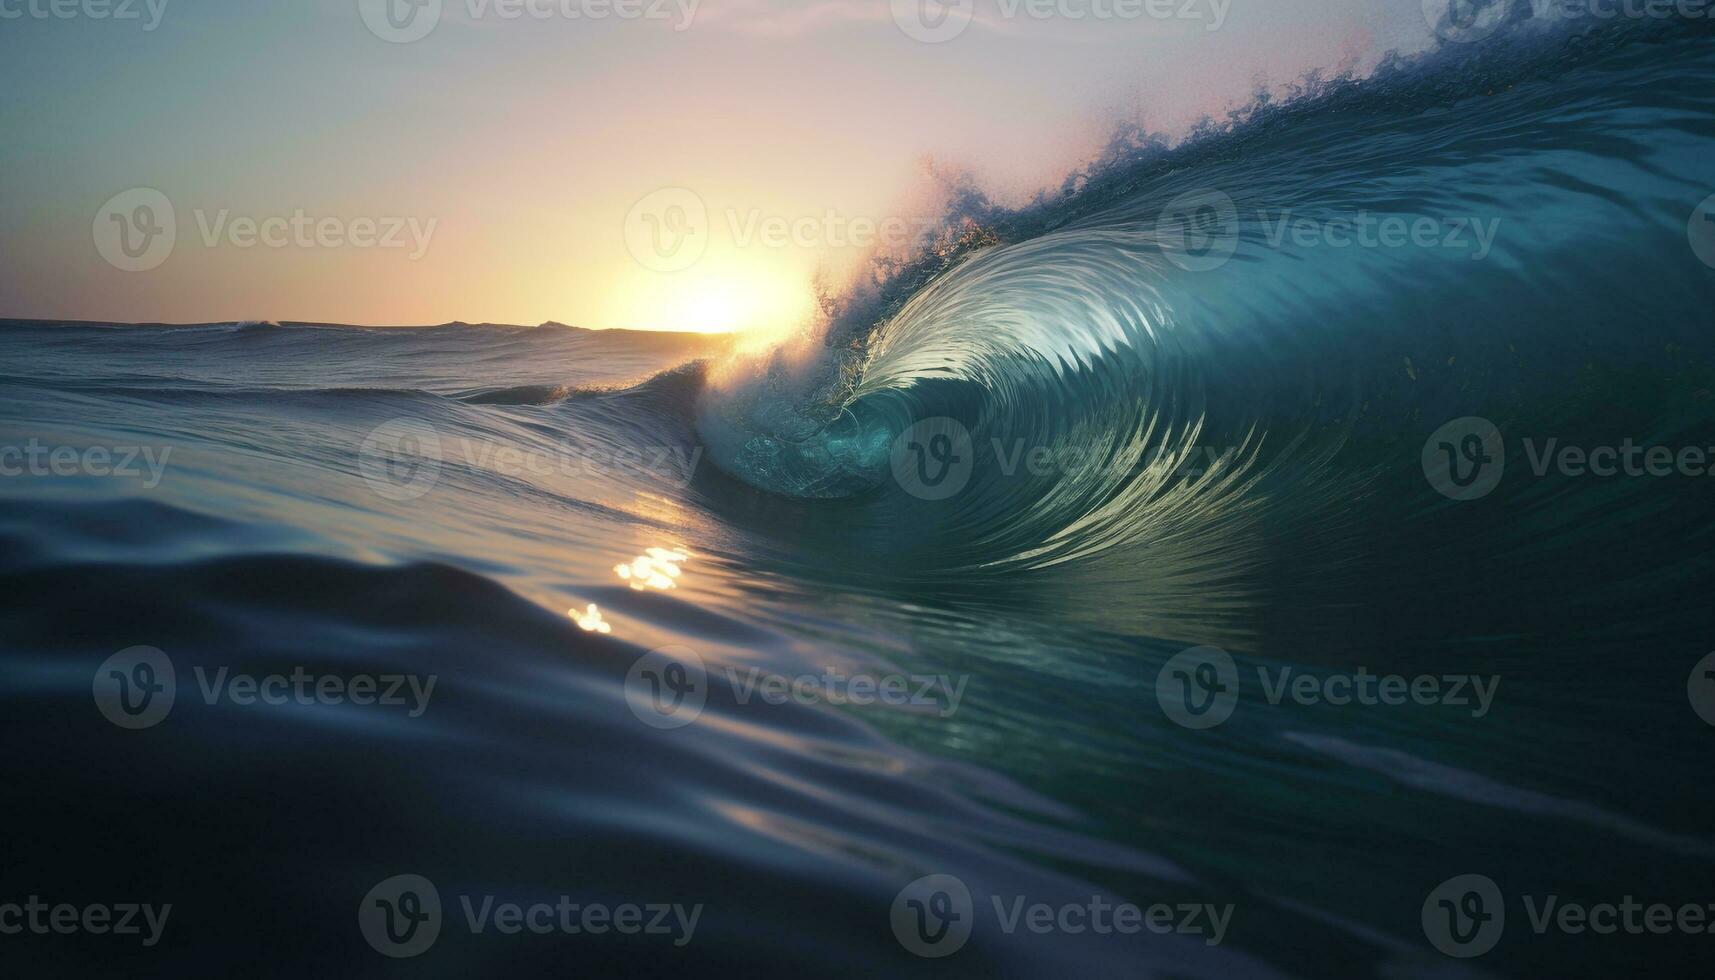 Surfers ride the crashing waves at dawn, a breathtaking sight generated by AI photo